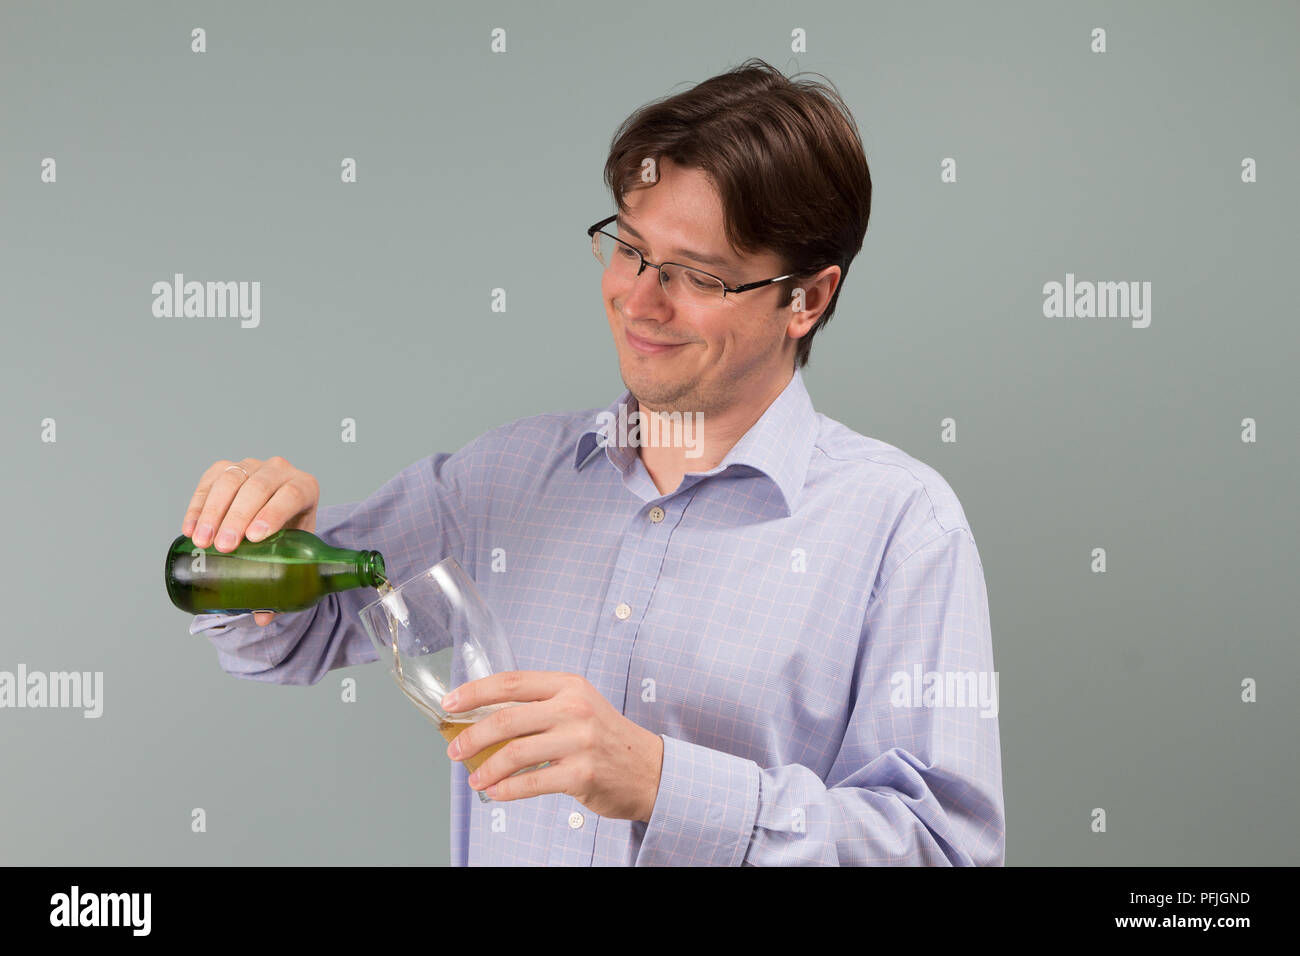 a young man pouring lager beer from green bottle to glass Stock Photo